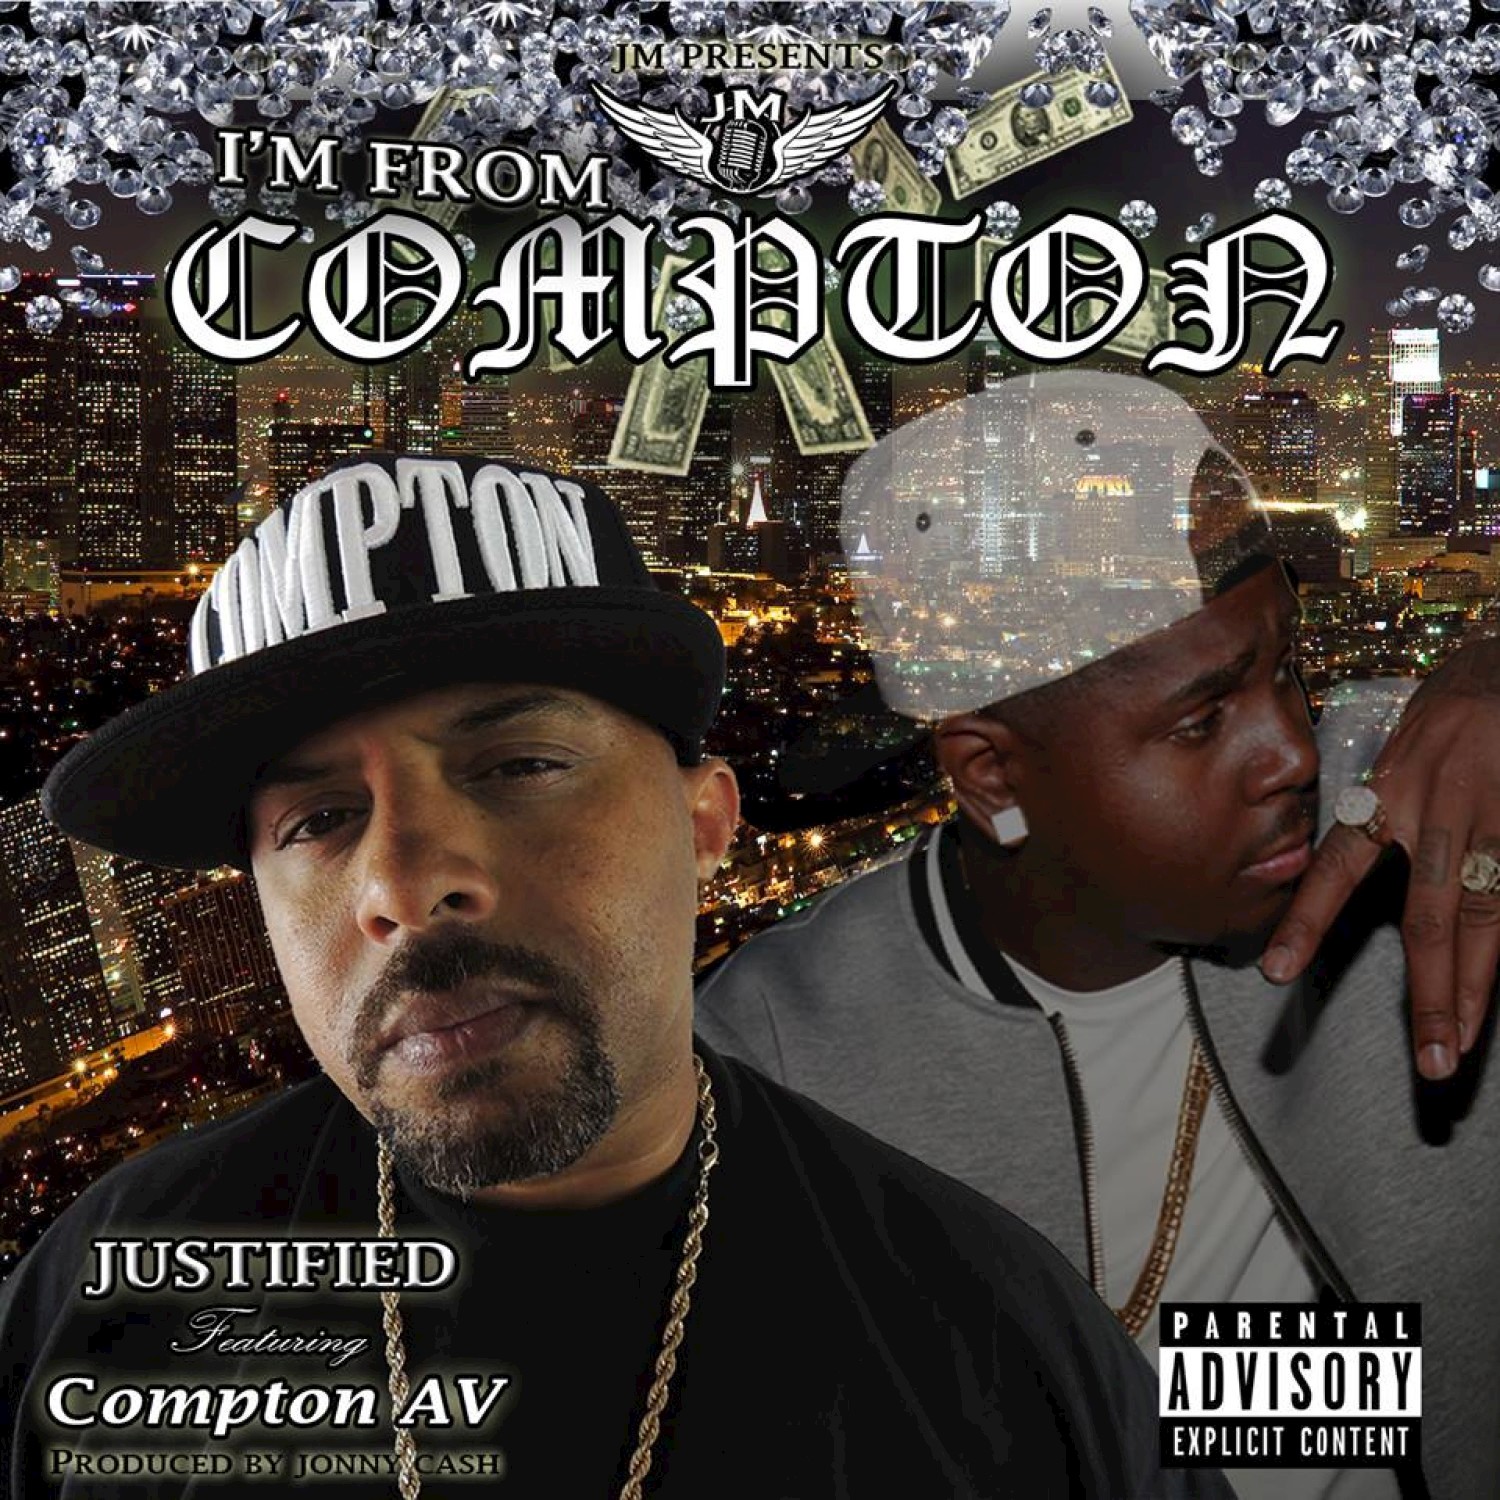 I'm from Compton